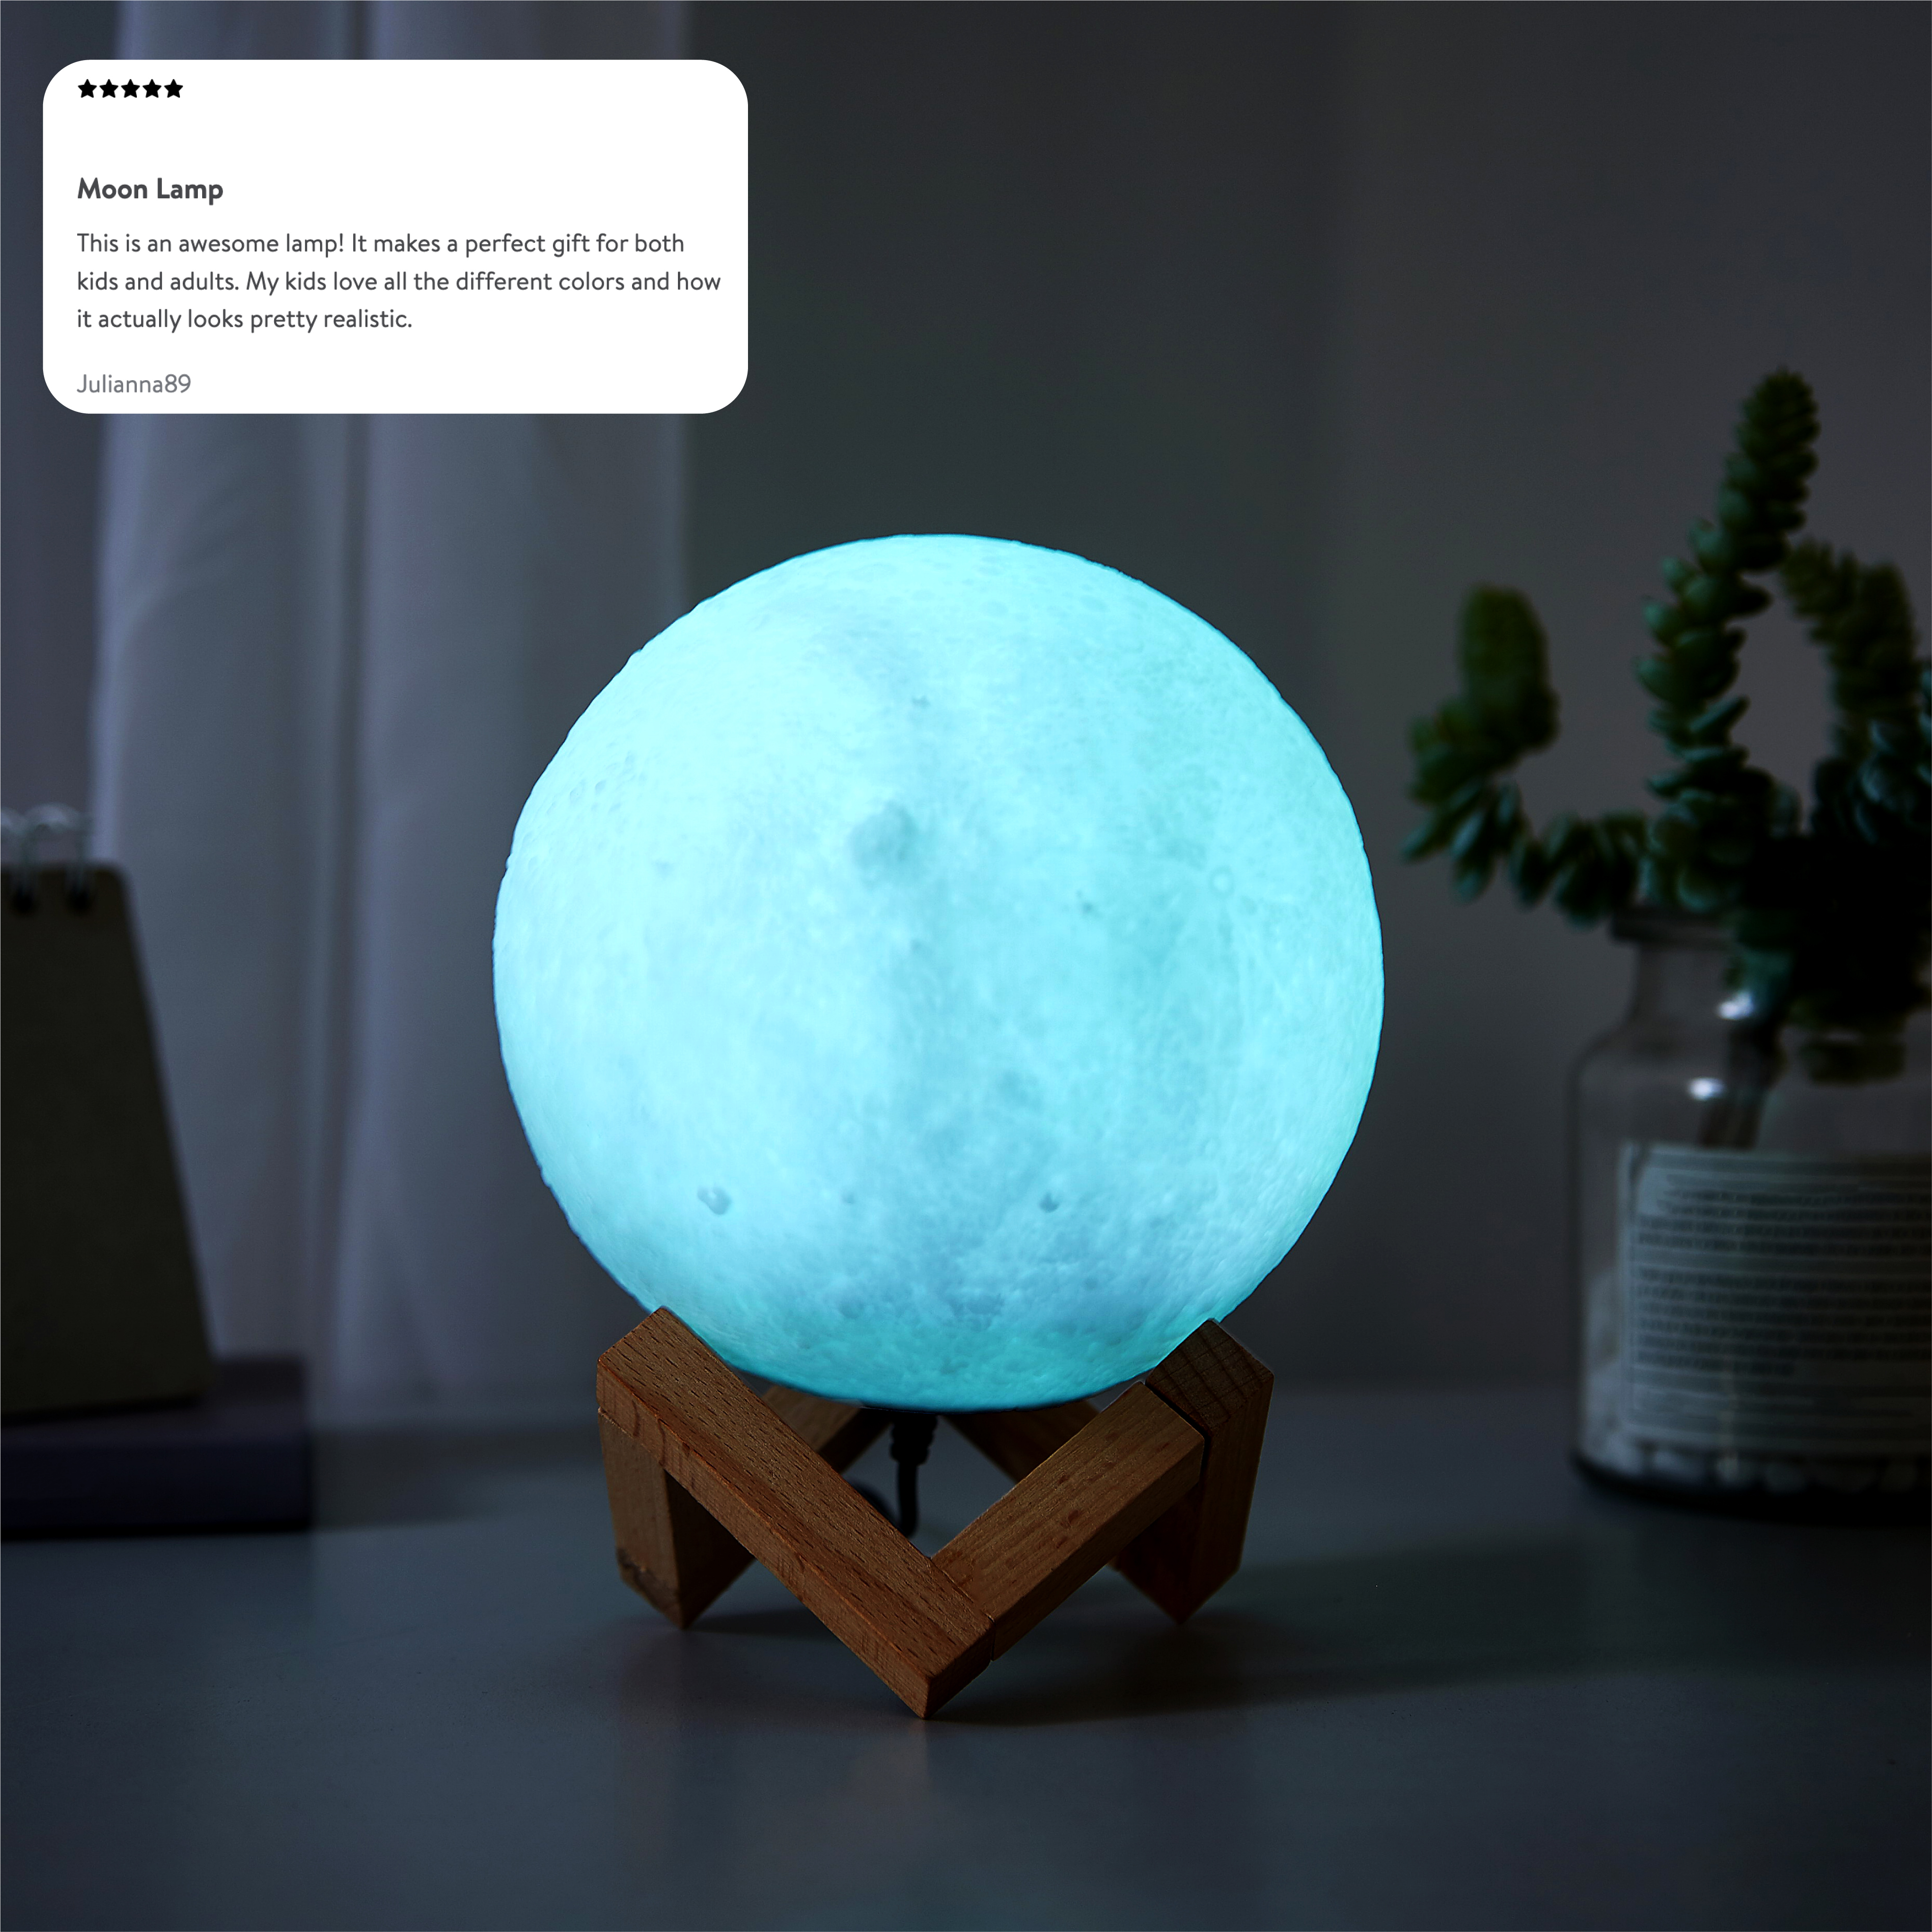 Urban Shop 3D Print Color Changing Moon Lamp with Wood Stand, remote control and USB Adaptor, 7.5'' x 5.5'', White - image 5 of 8